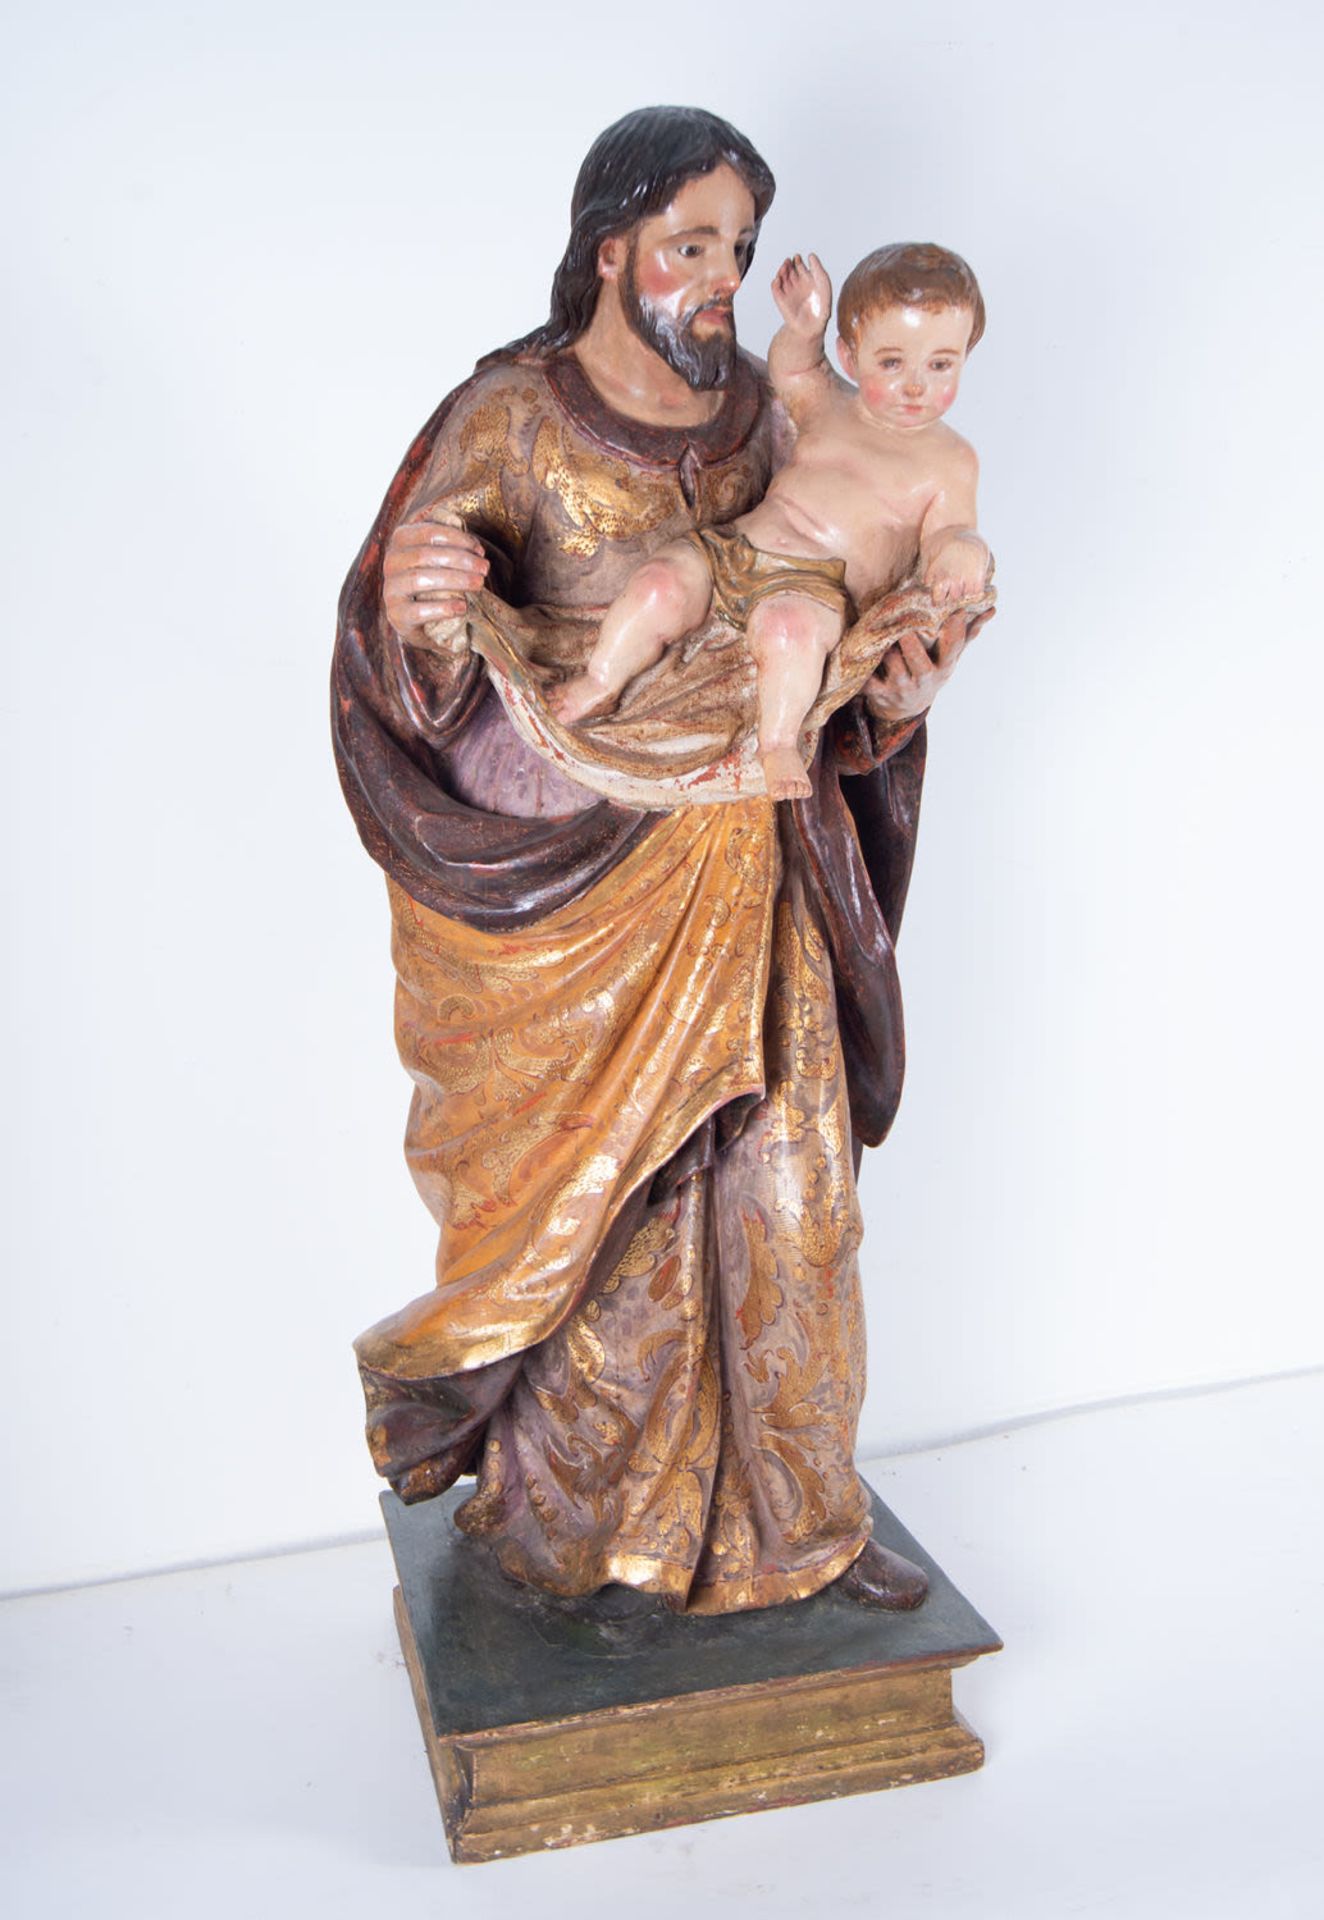 Saint Joseph with Child in Arms, Sevillian school of Pedro Roldán from the end of the 17th century - Image 4 of 6